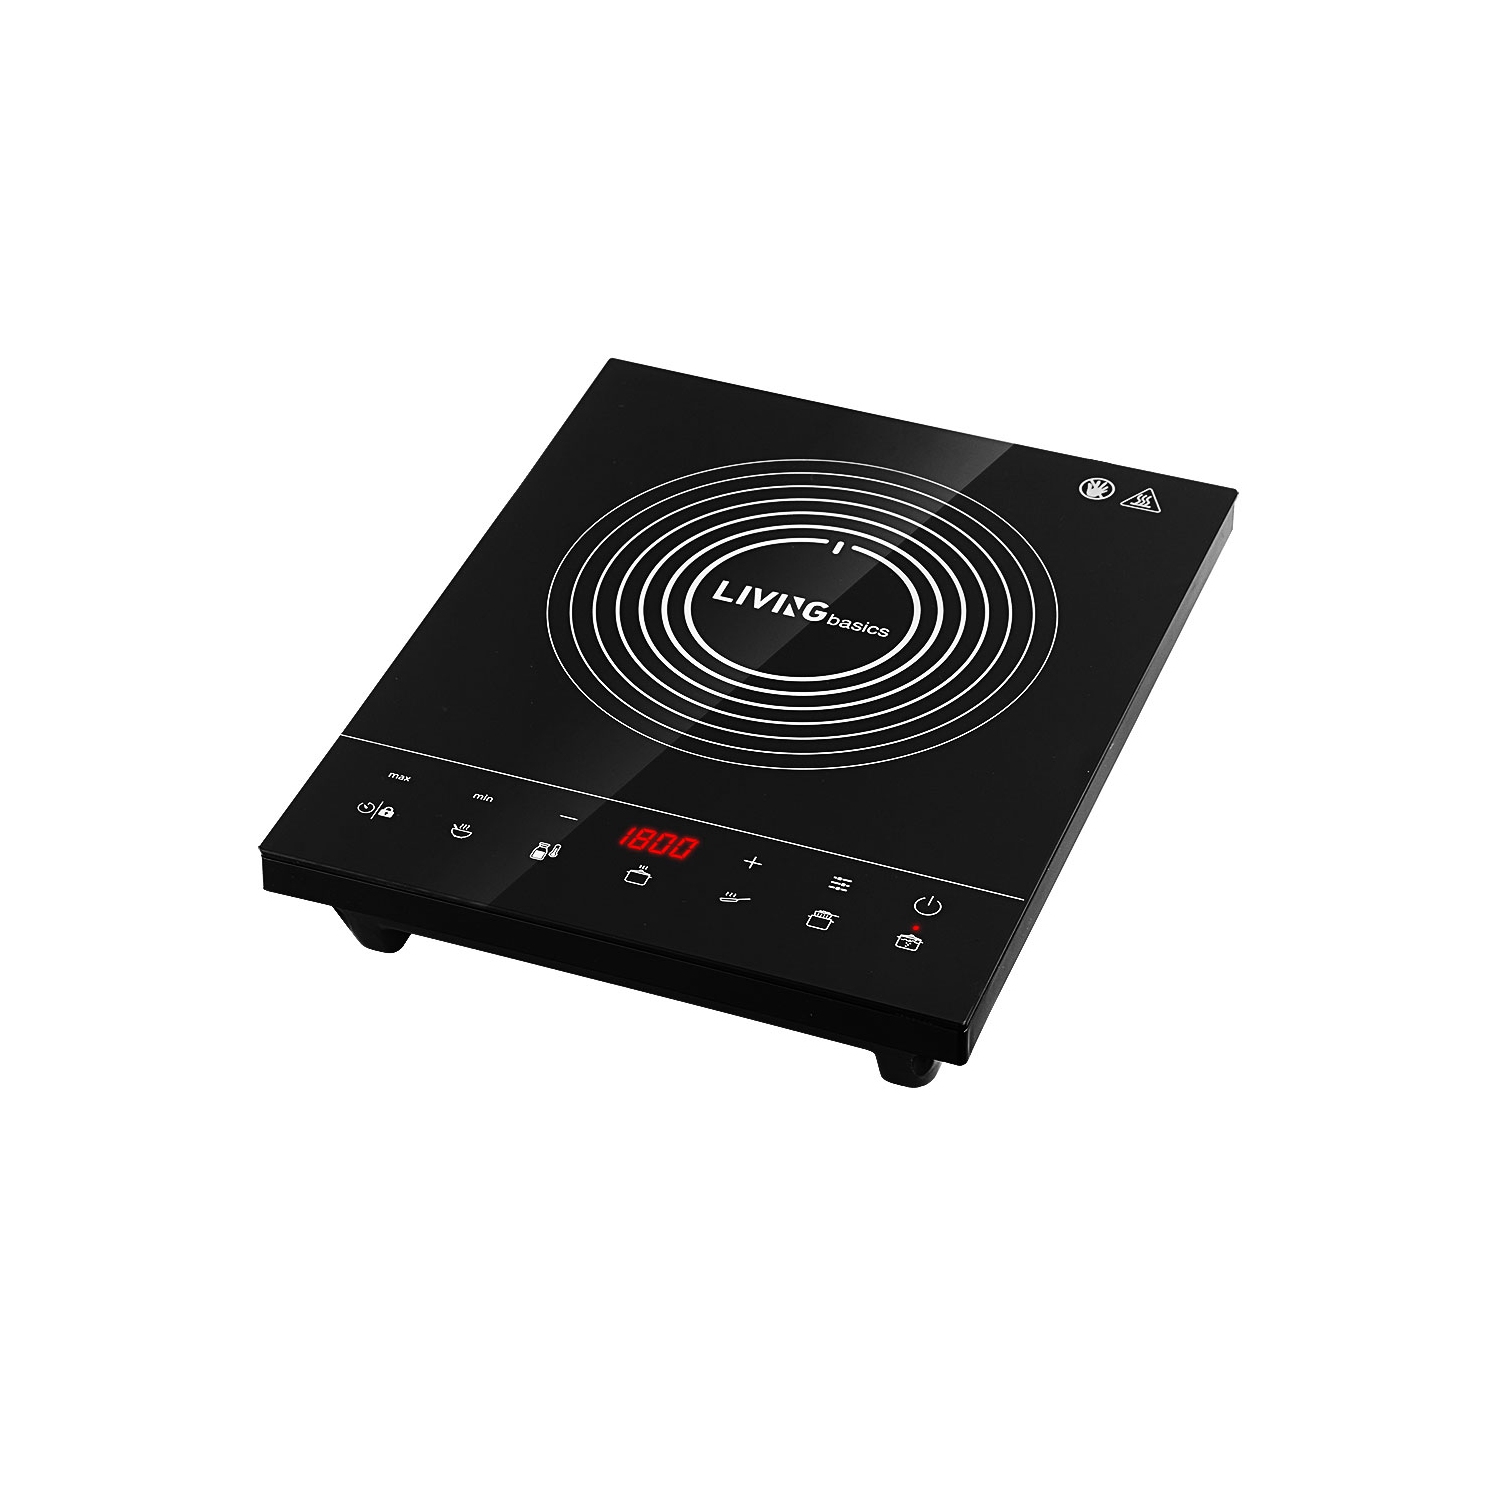 1800W Portable Induction Cooktop, Digital Countertop Burner With